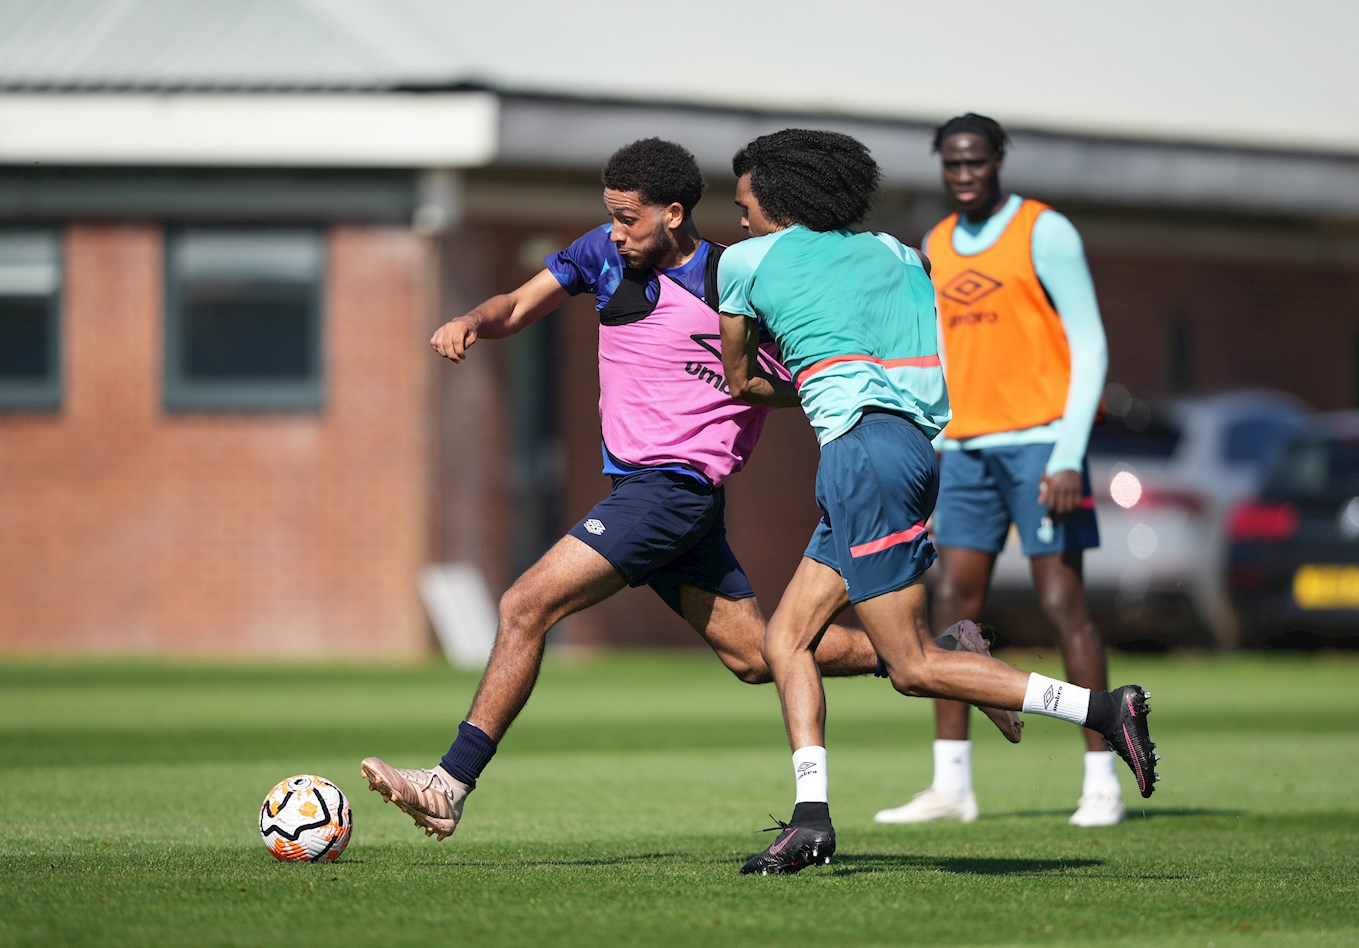 Development squad striker Millar Matthews-Lewis in action while training with the first team